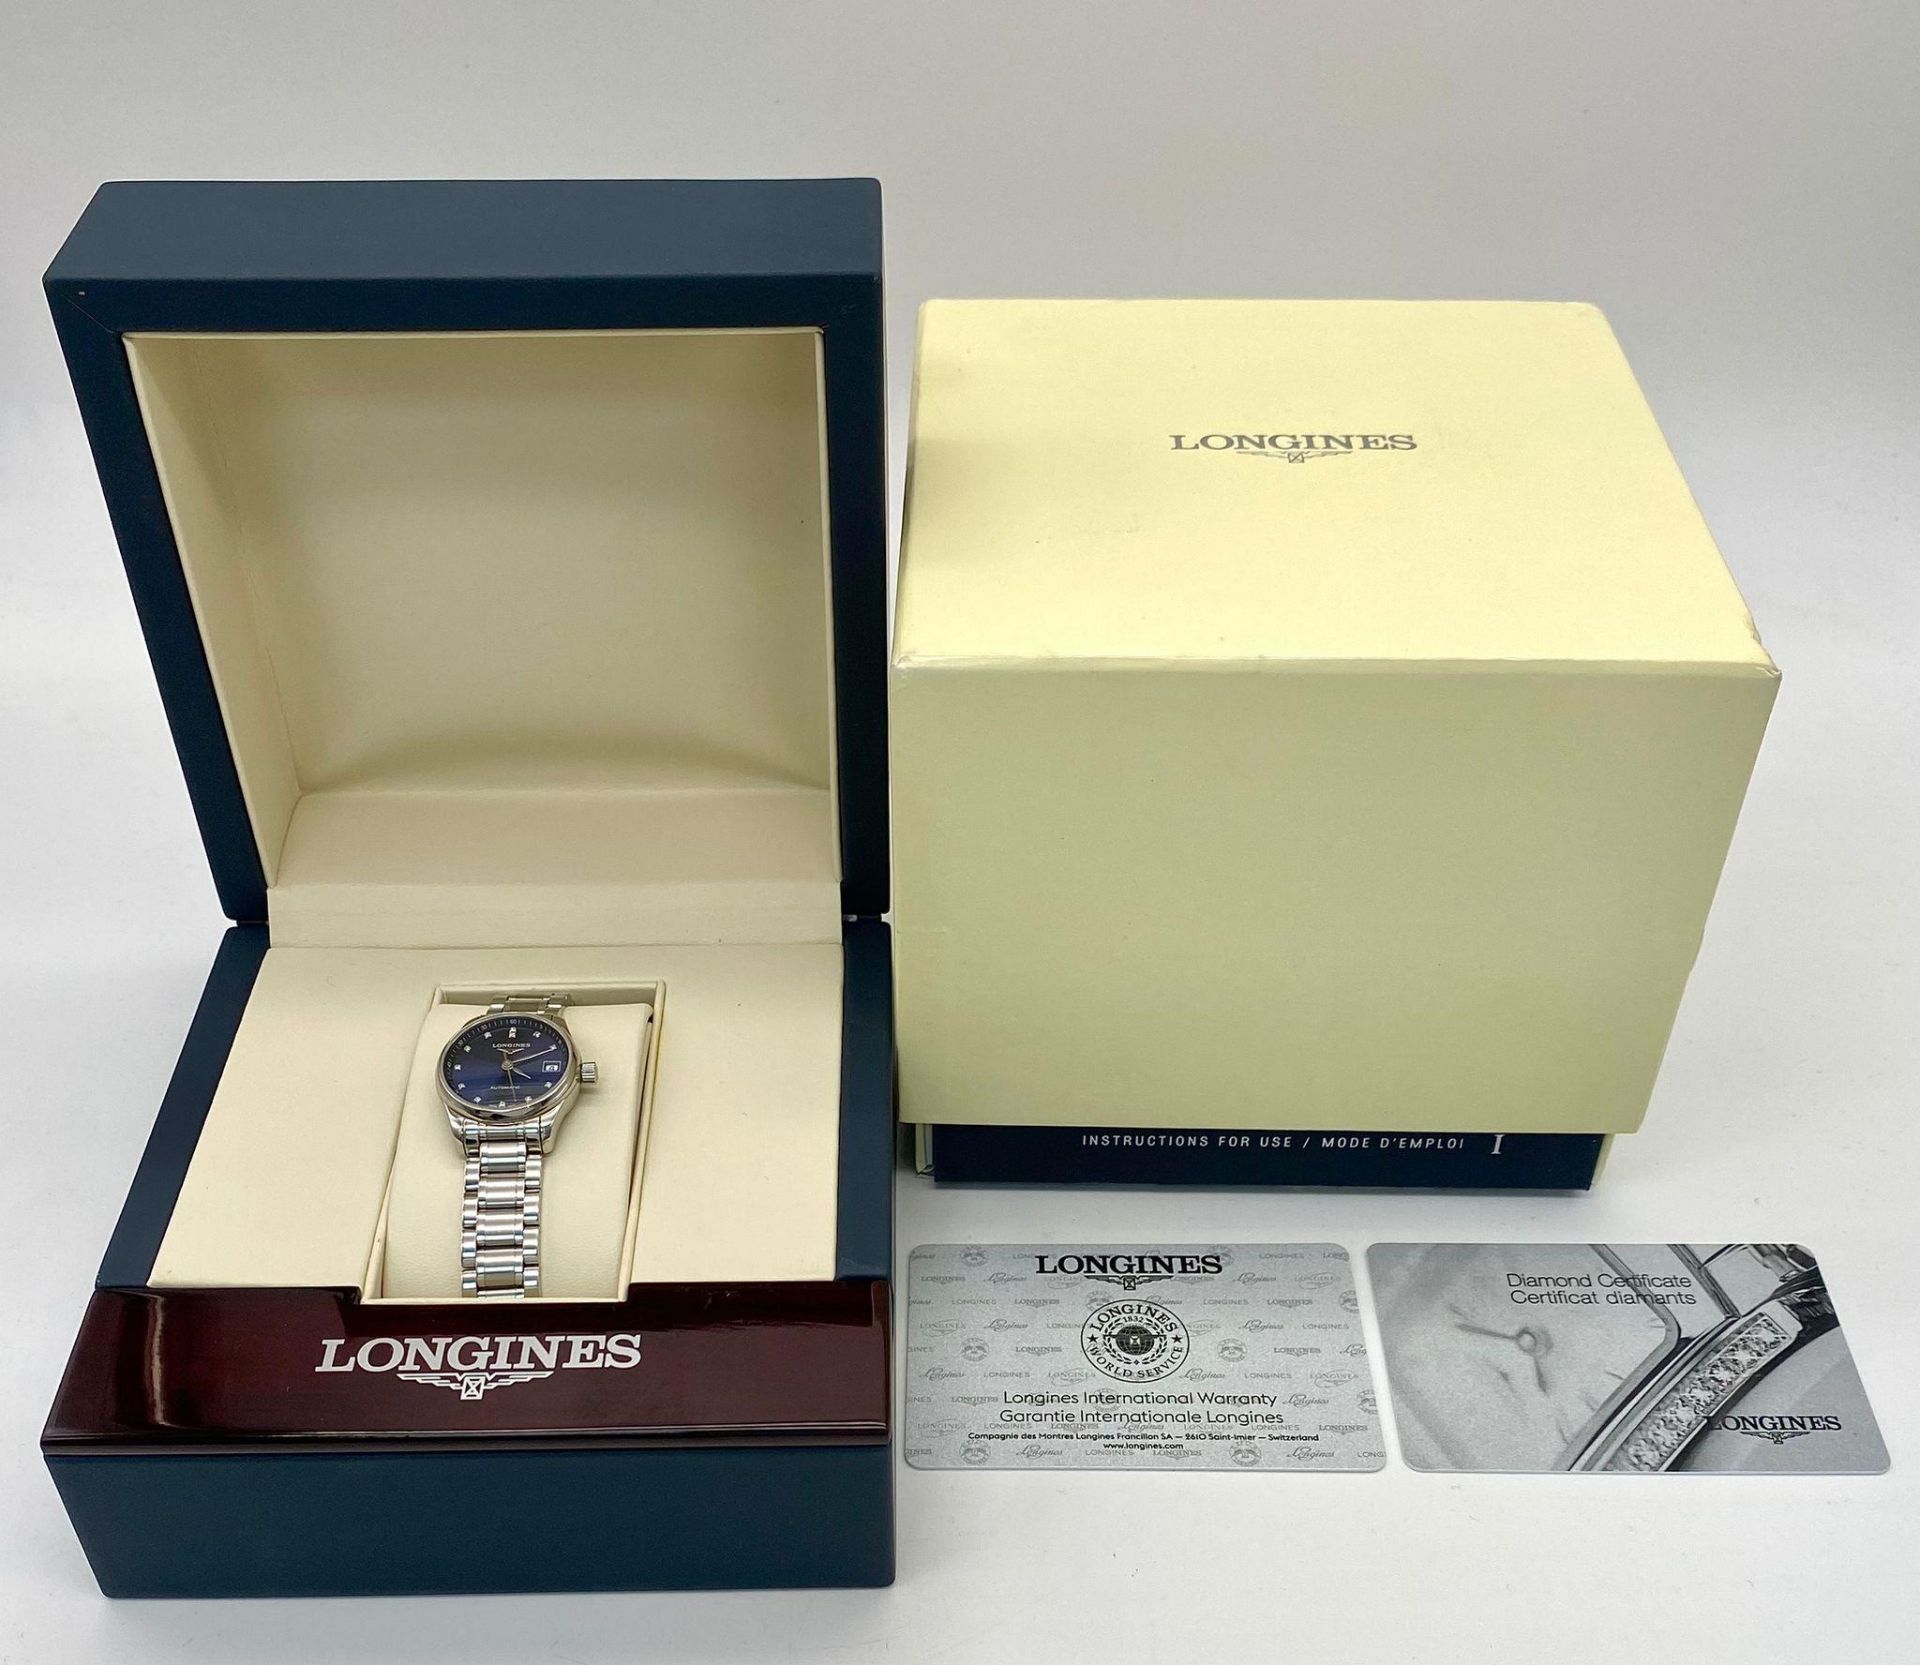 A Longines Automatic Diamond Ladies Watch. Stainless steel bracelet and case - 26mm. Electric blue - Image 12 of 12